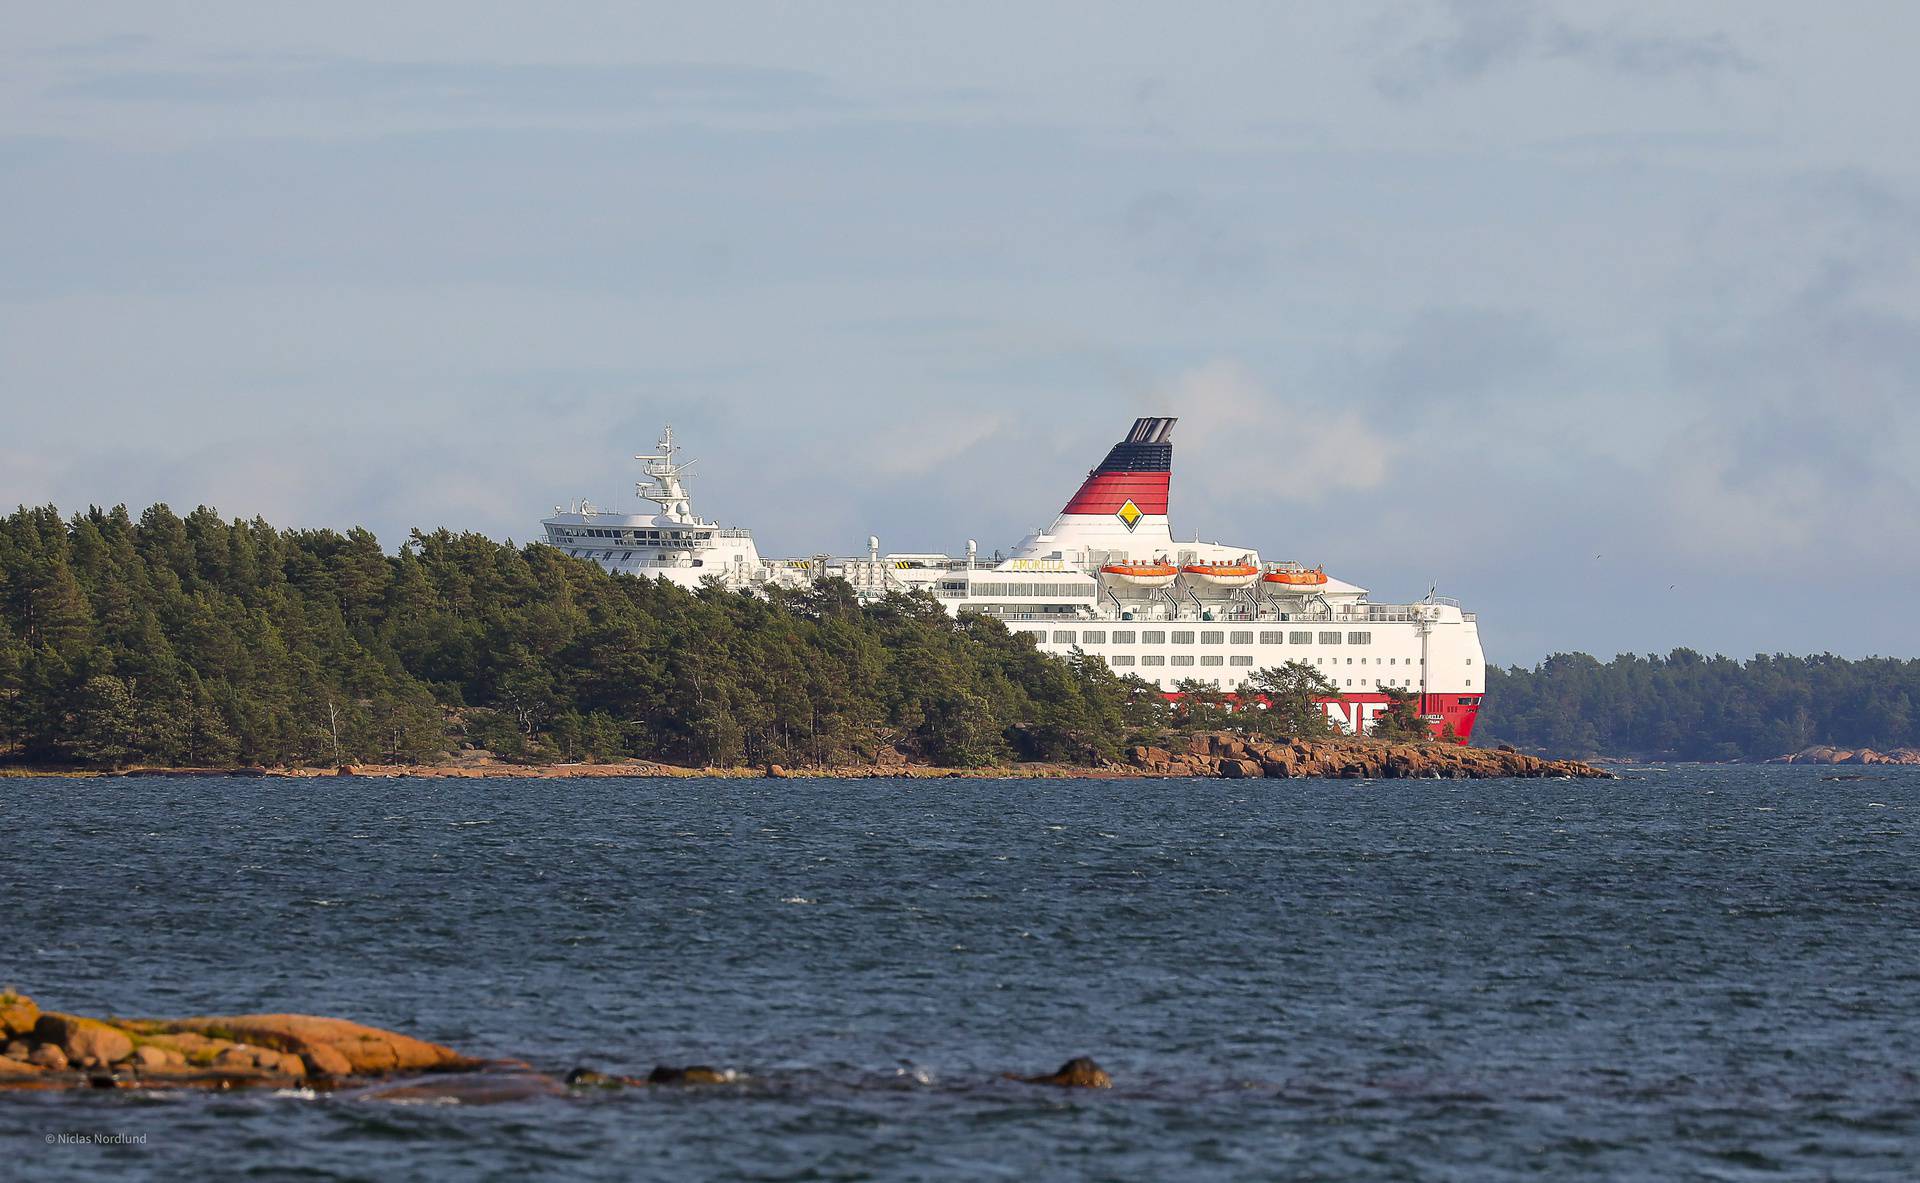 Viking Line's cruiseferry MS Amorella is seen in a stable situation in Foglo